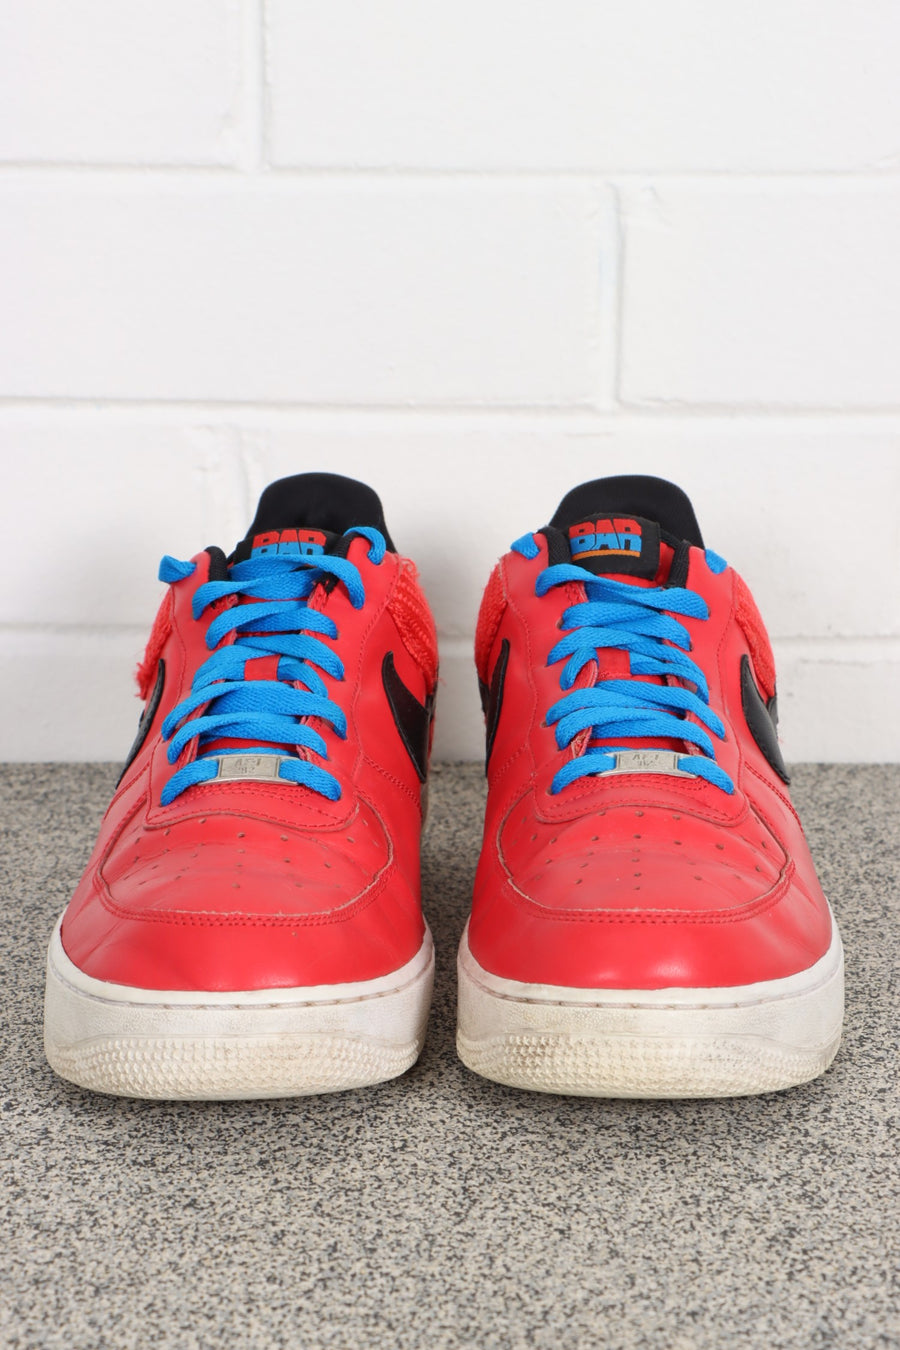 NIKE Air Force 1 'Barcelona' Challenge Red/Black Low Sneakers (11.5)